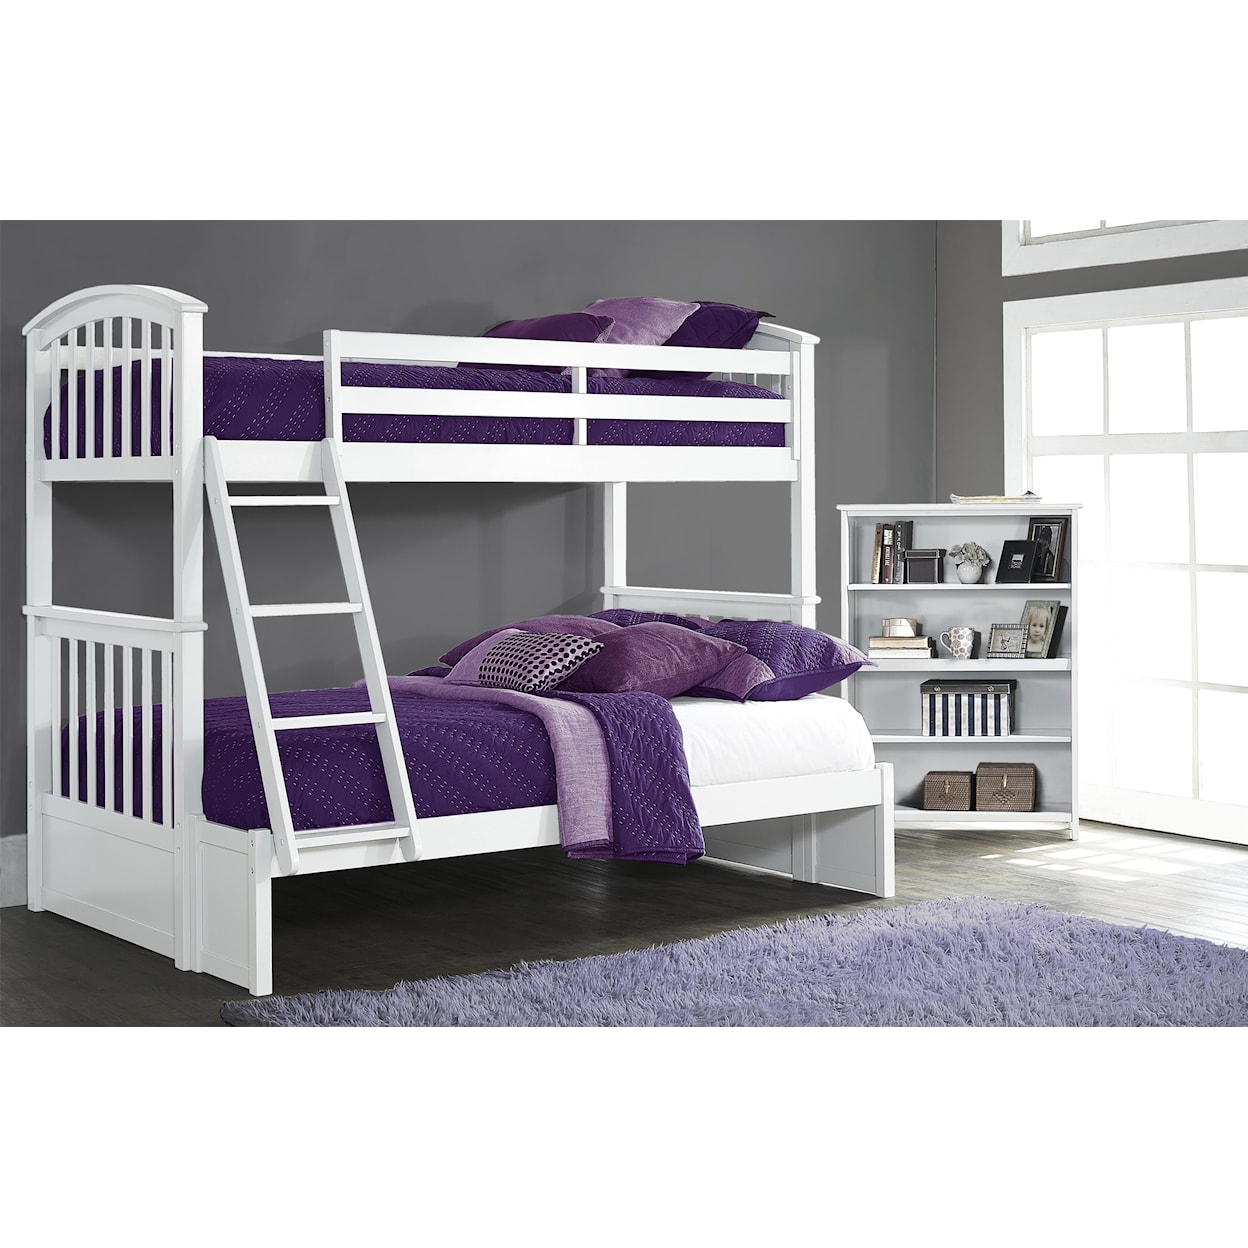 Hillsdale Schoolhouse Full Bunk Bed